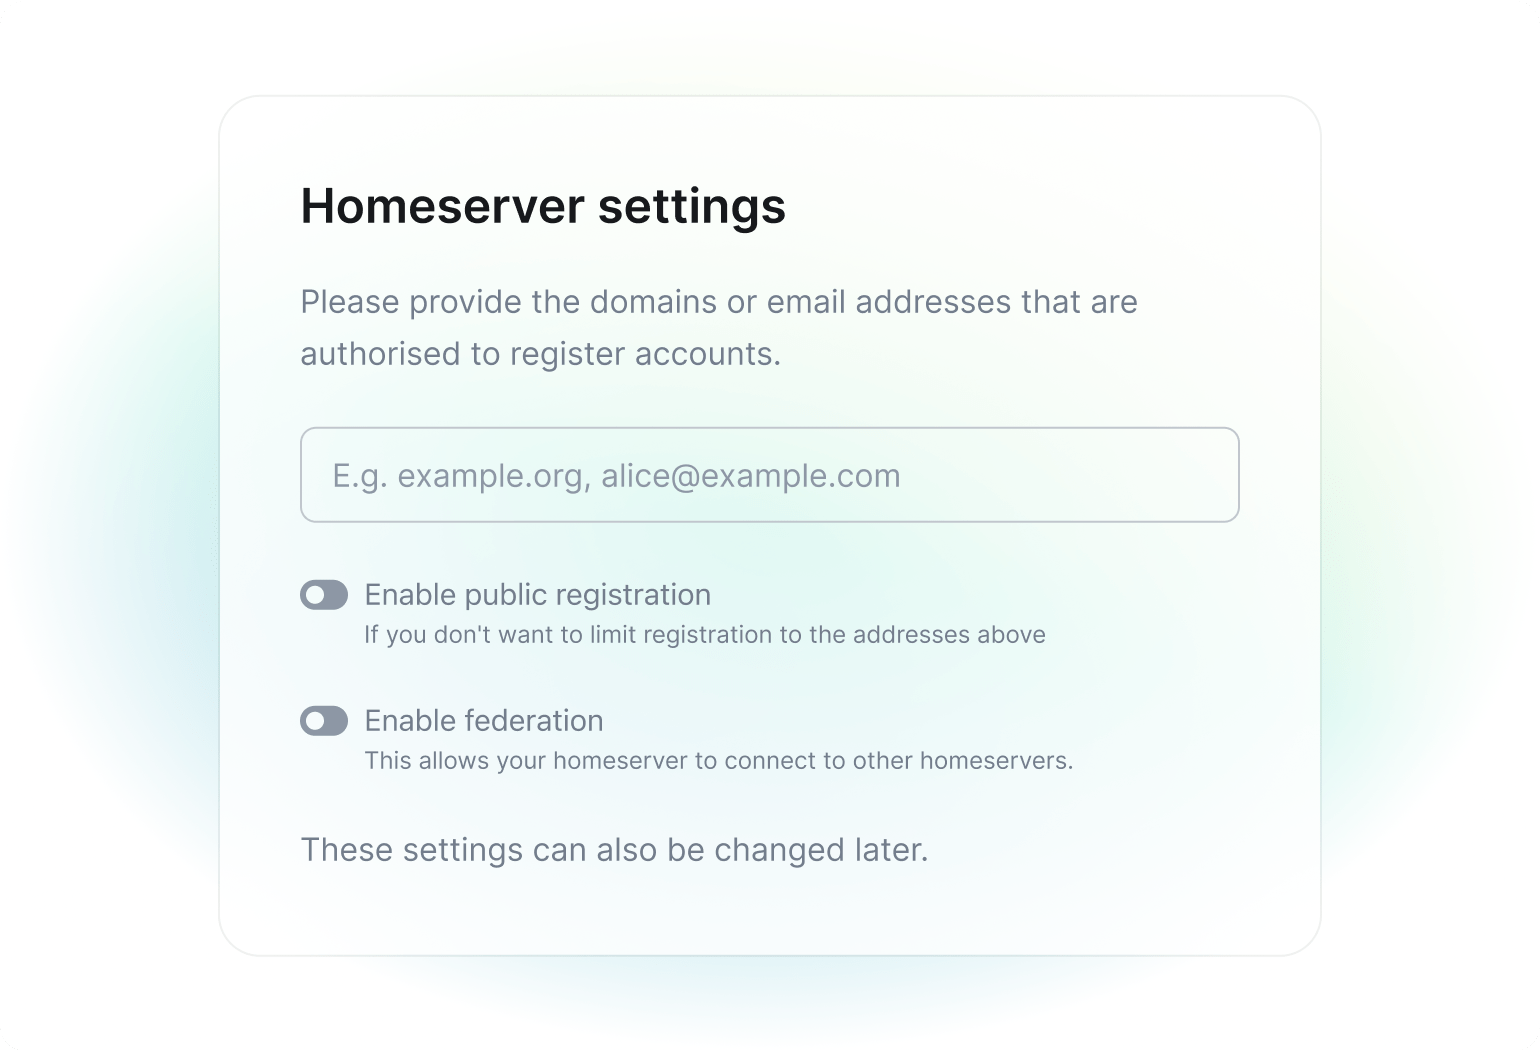 Homeserver settings such as authorised accounts, public registration and federation.